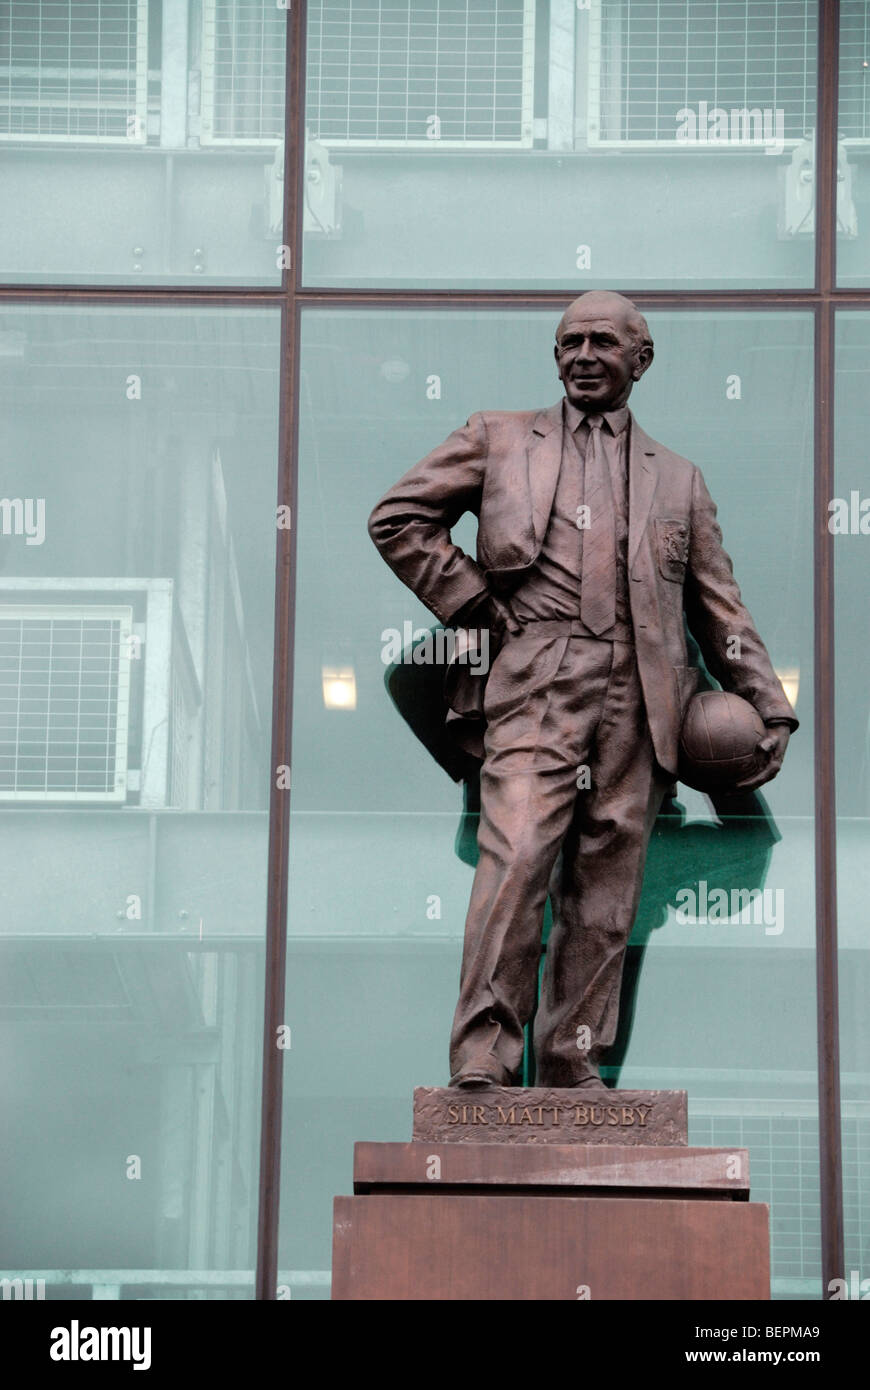 Statue of Sir Matt Busby outside Manchester United Old Trafford football stadium Stock Photo